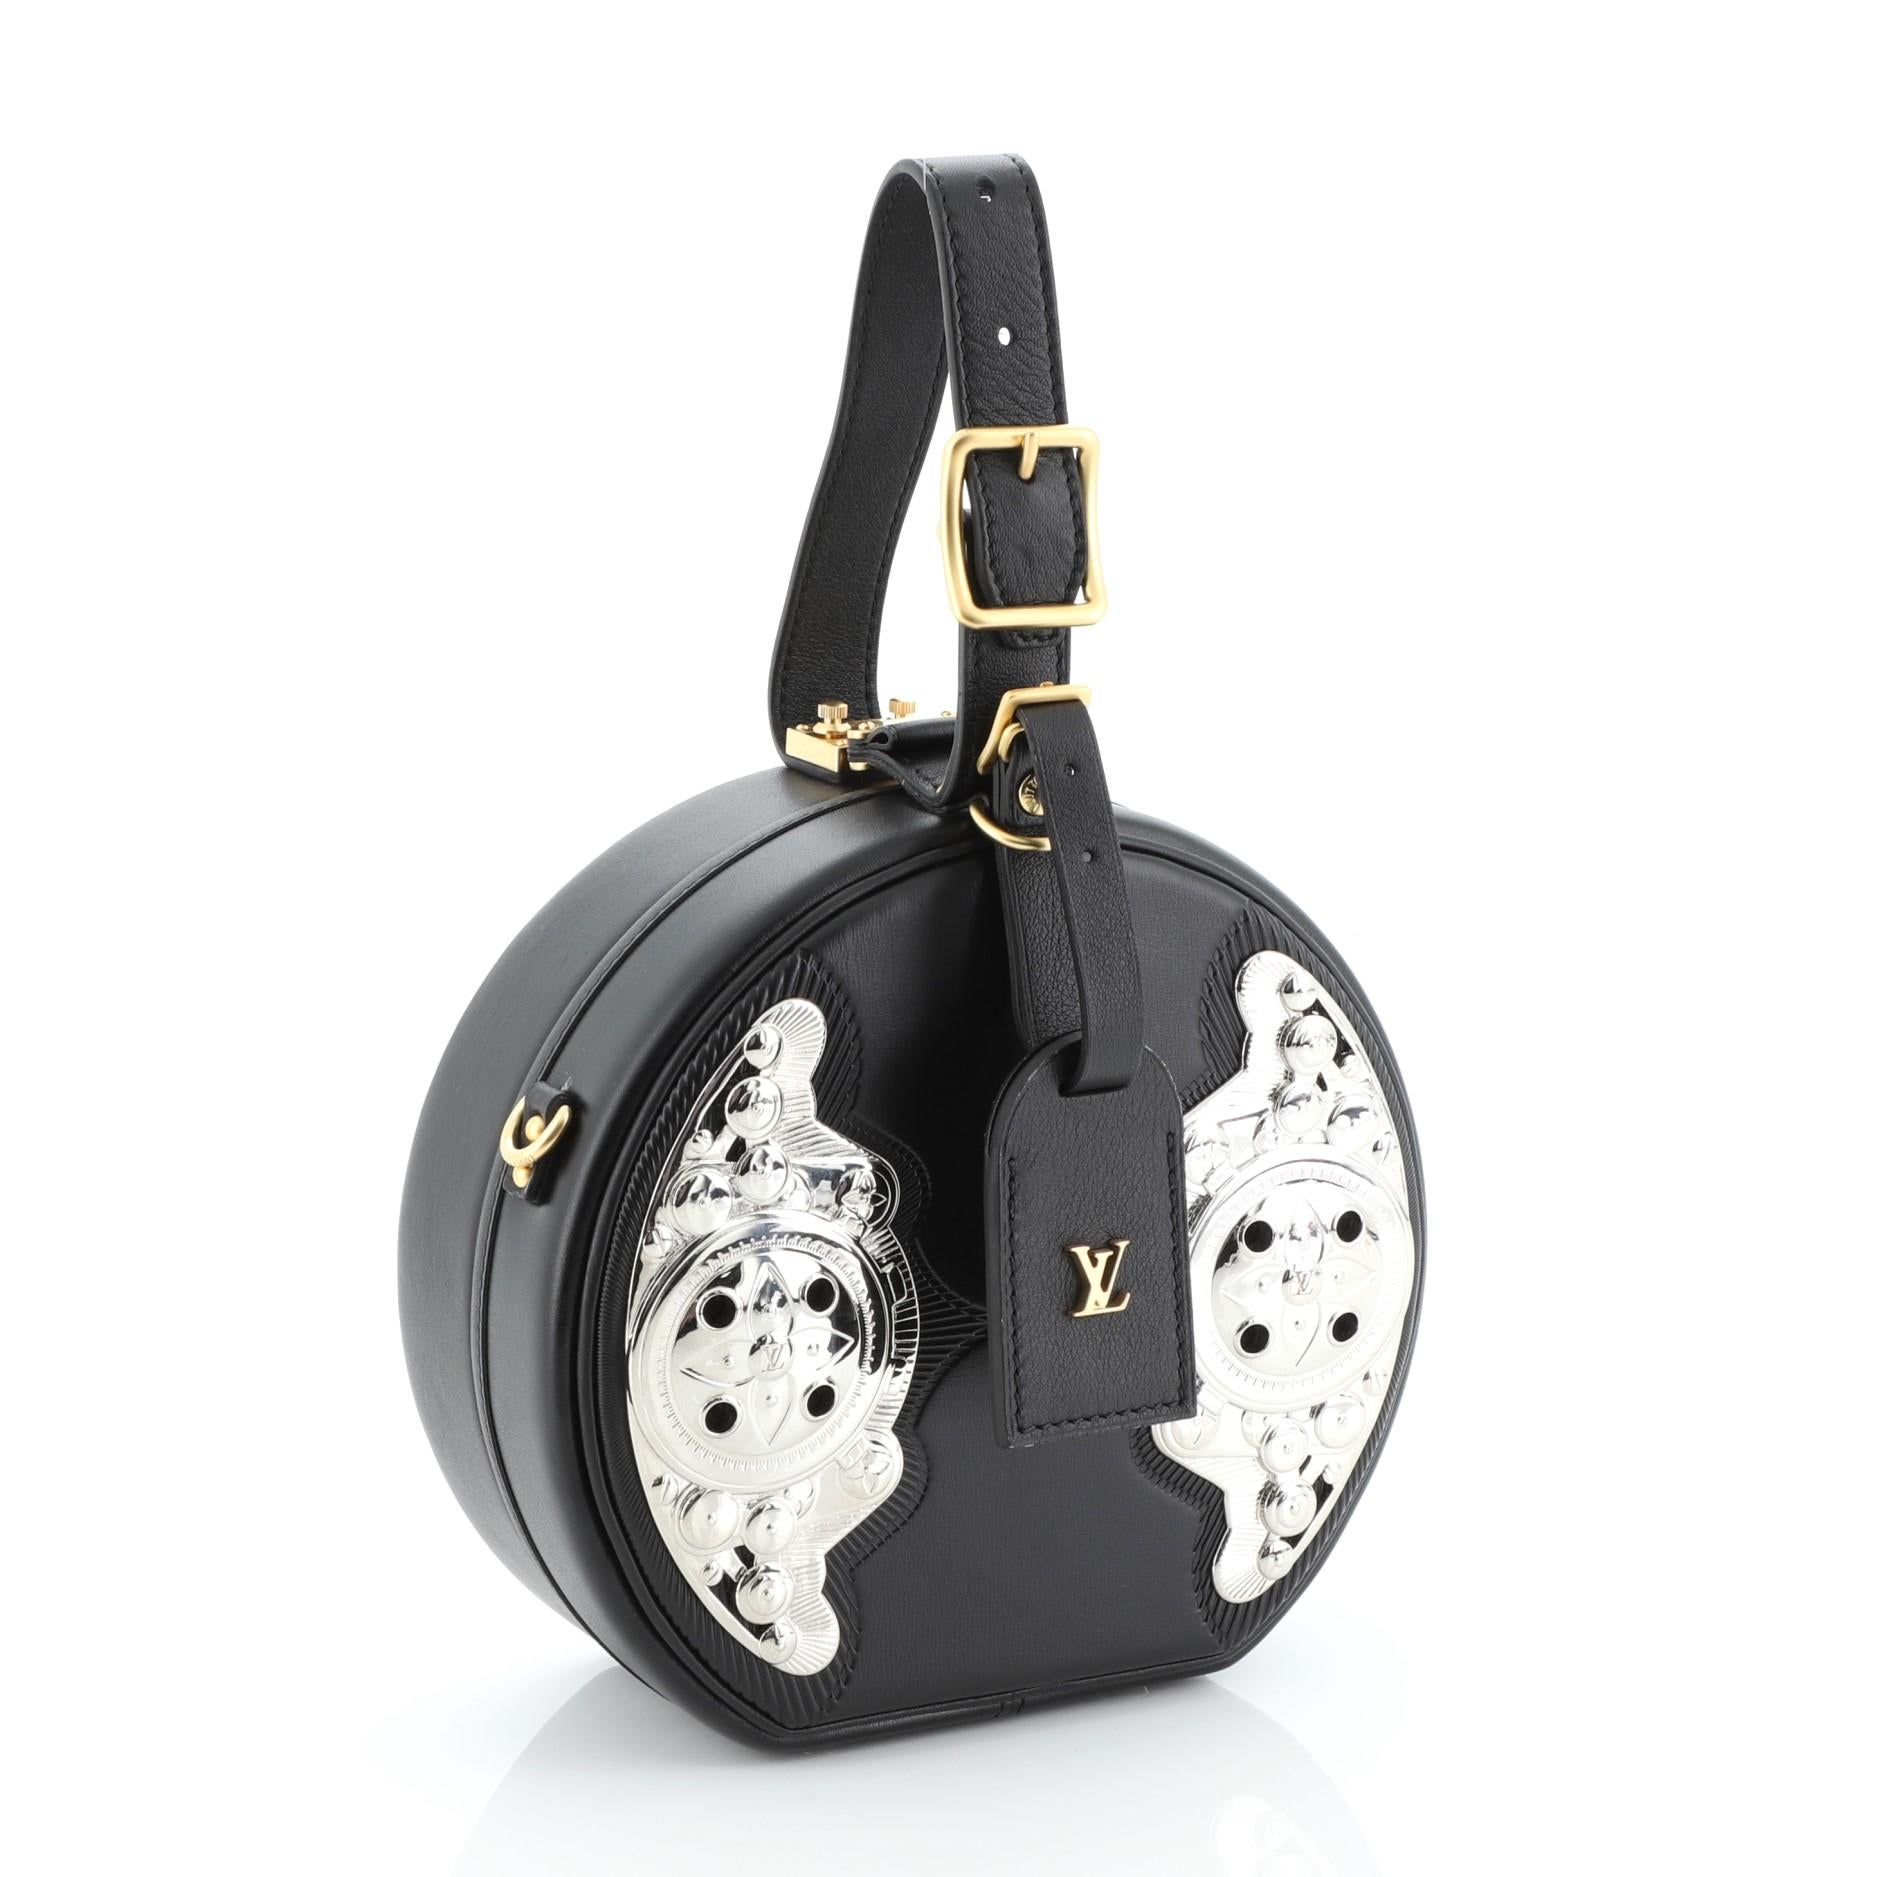 This Louis Vuitton Petite Boite Chapeau Bag Embellished Leather, crafted in black embellished leather, features an adjustable top leather handle, round silhouette, Wild West-inspired metallic design, and silver and gold-tone hardware. It opens to a